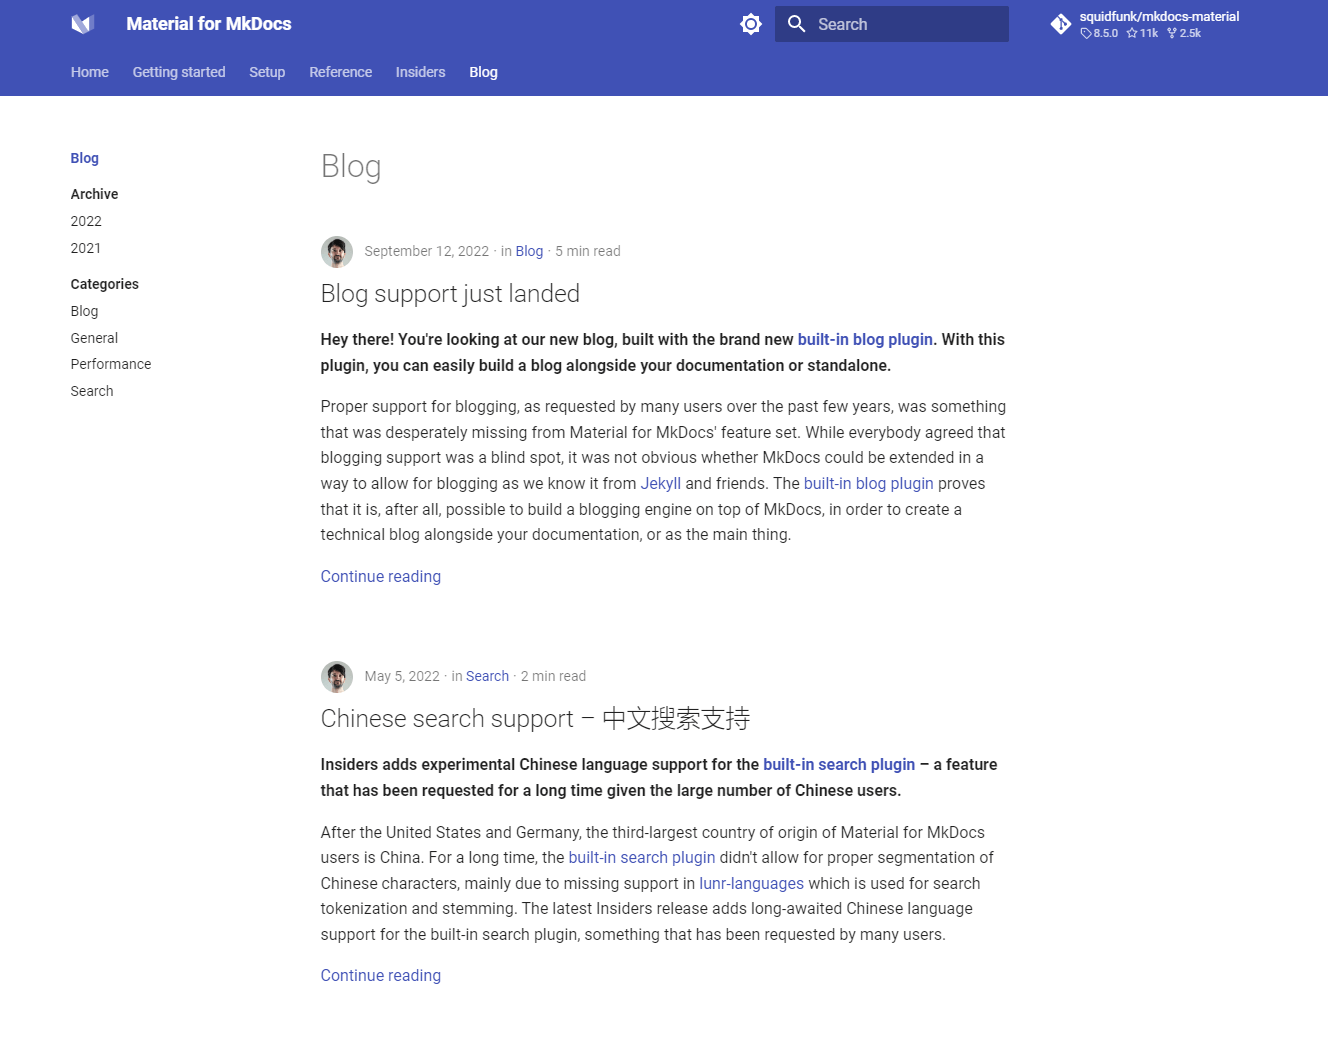 Screenshot showing the default look and feel of the Material for MkDocs blog